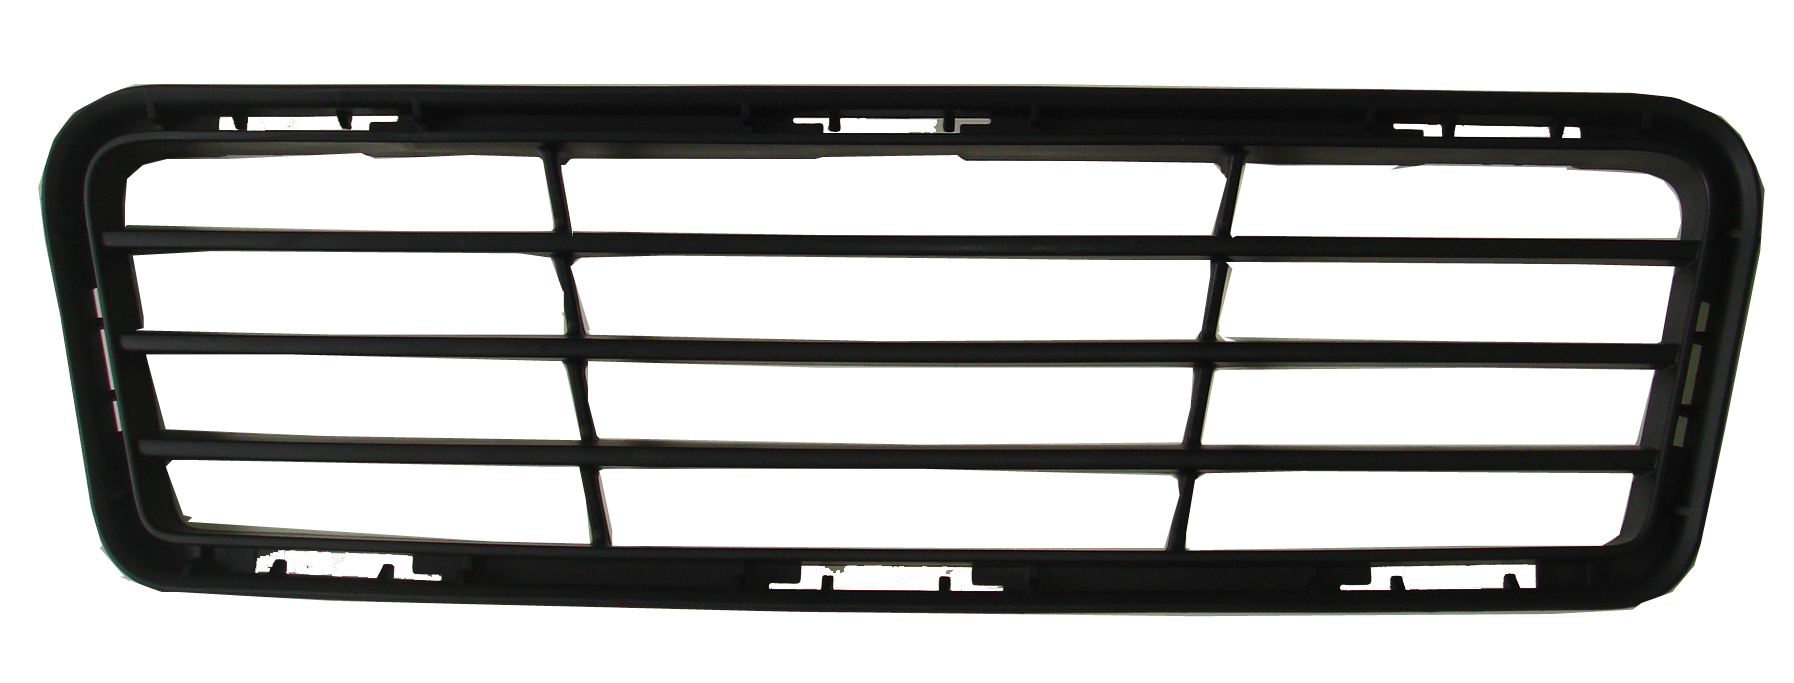 Aftermarket GRILLES for TOYOTA - CAMRY, CAMRY,12-14,Front bumper grille